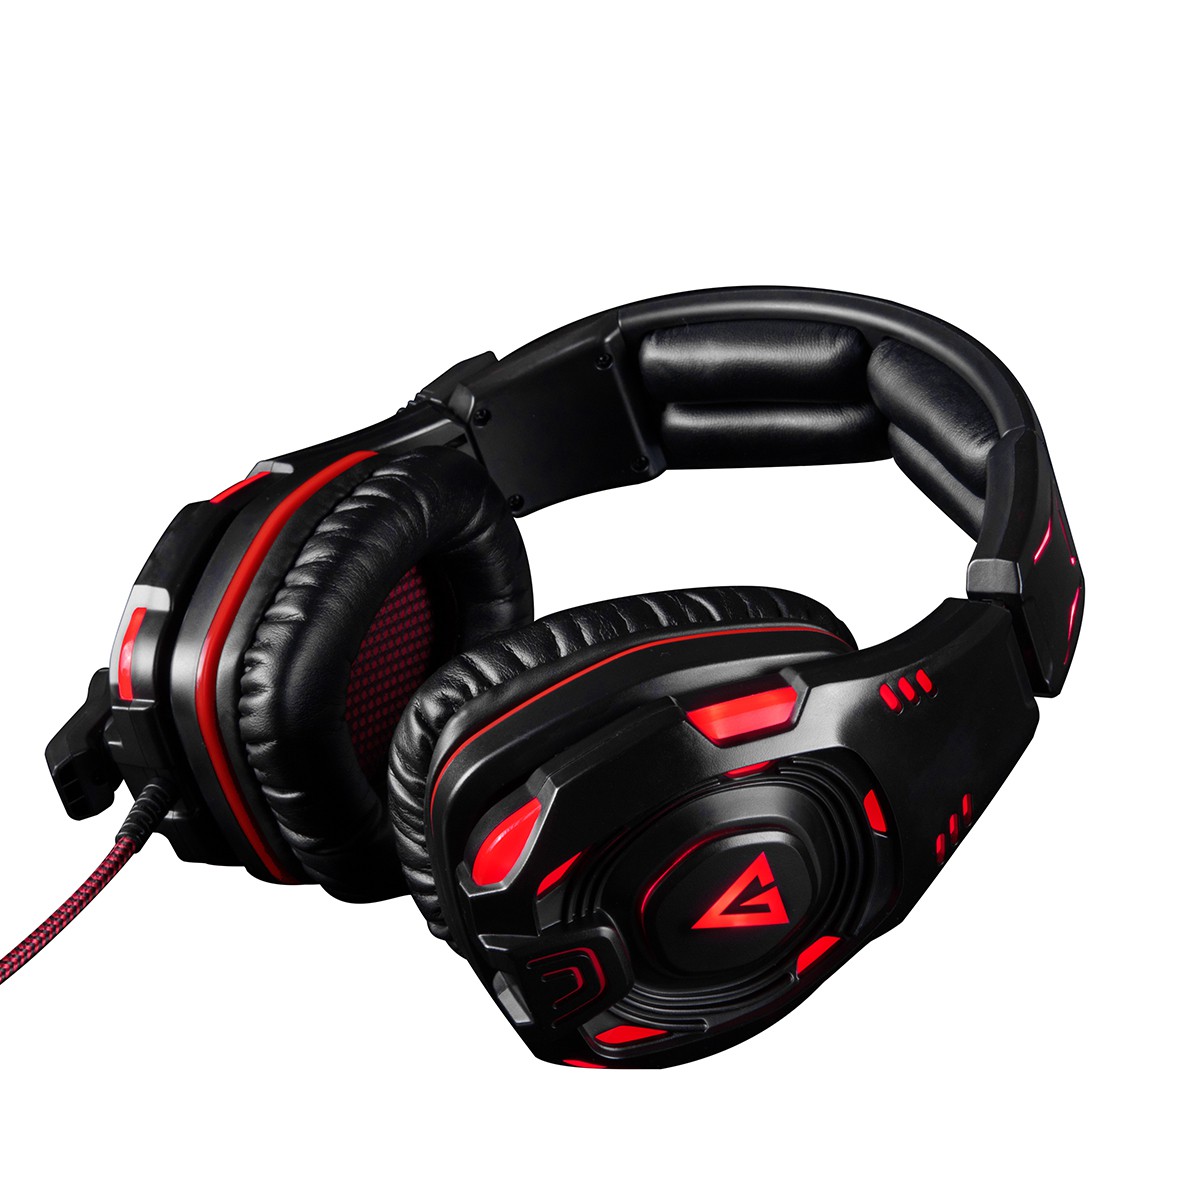 MODECOM MC-832 GHOST wired gaming headphones 7.1